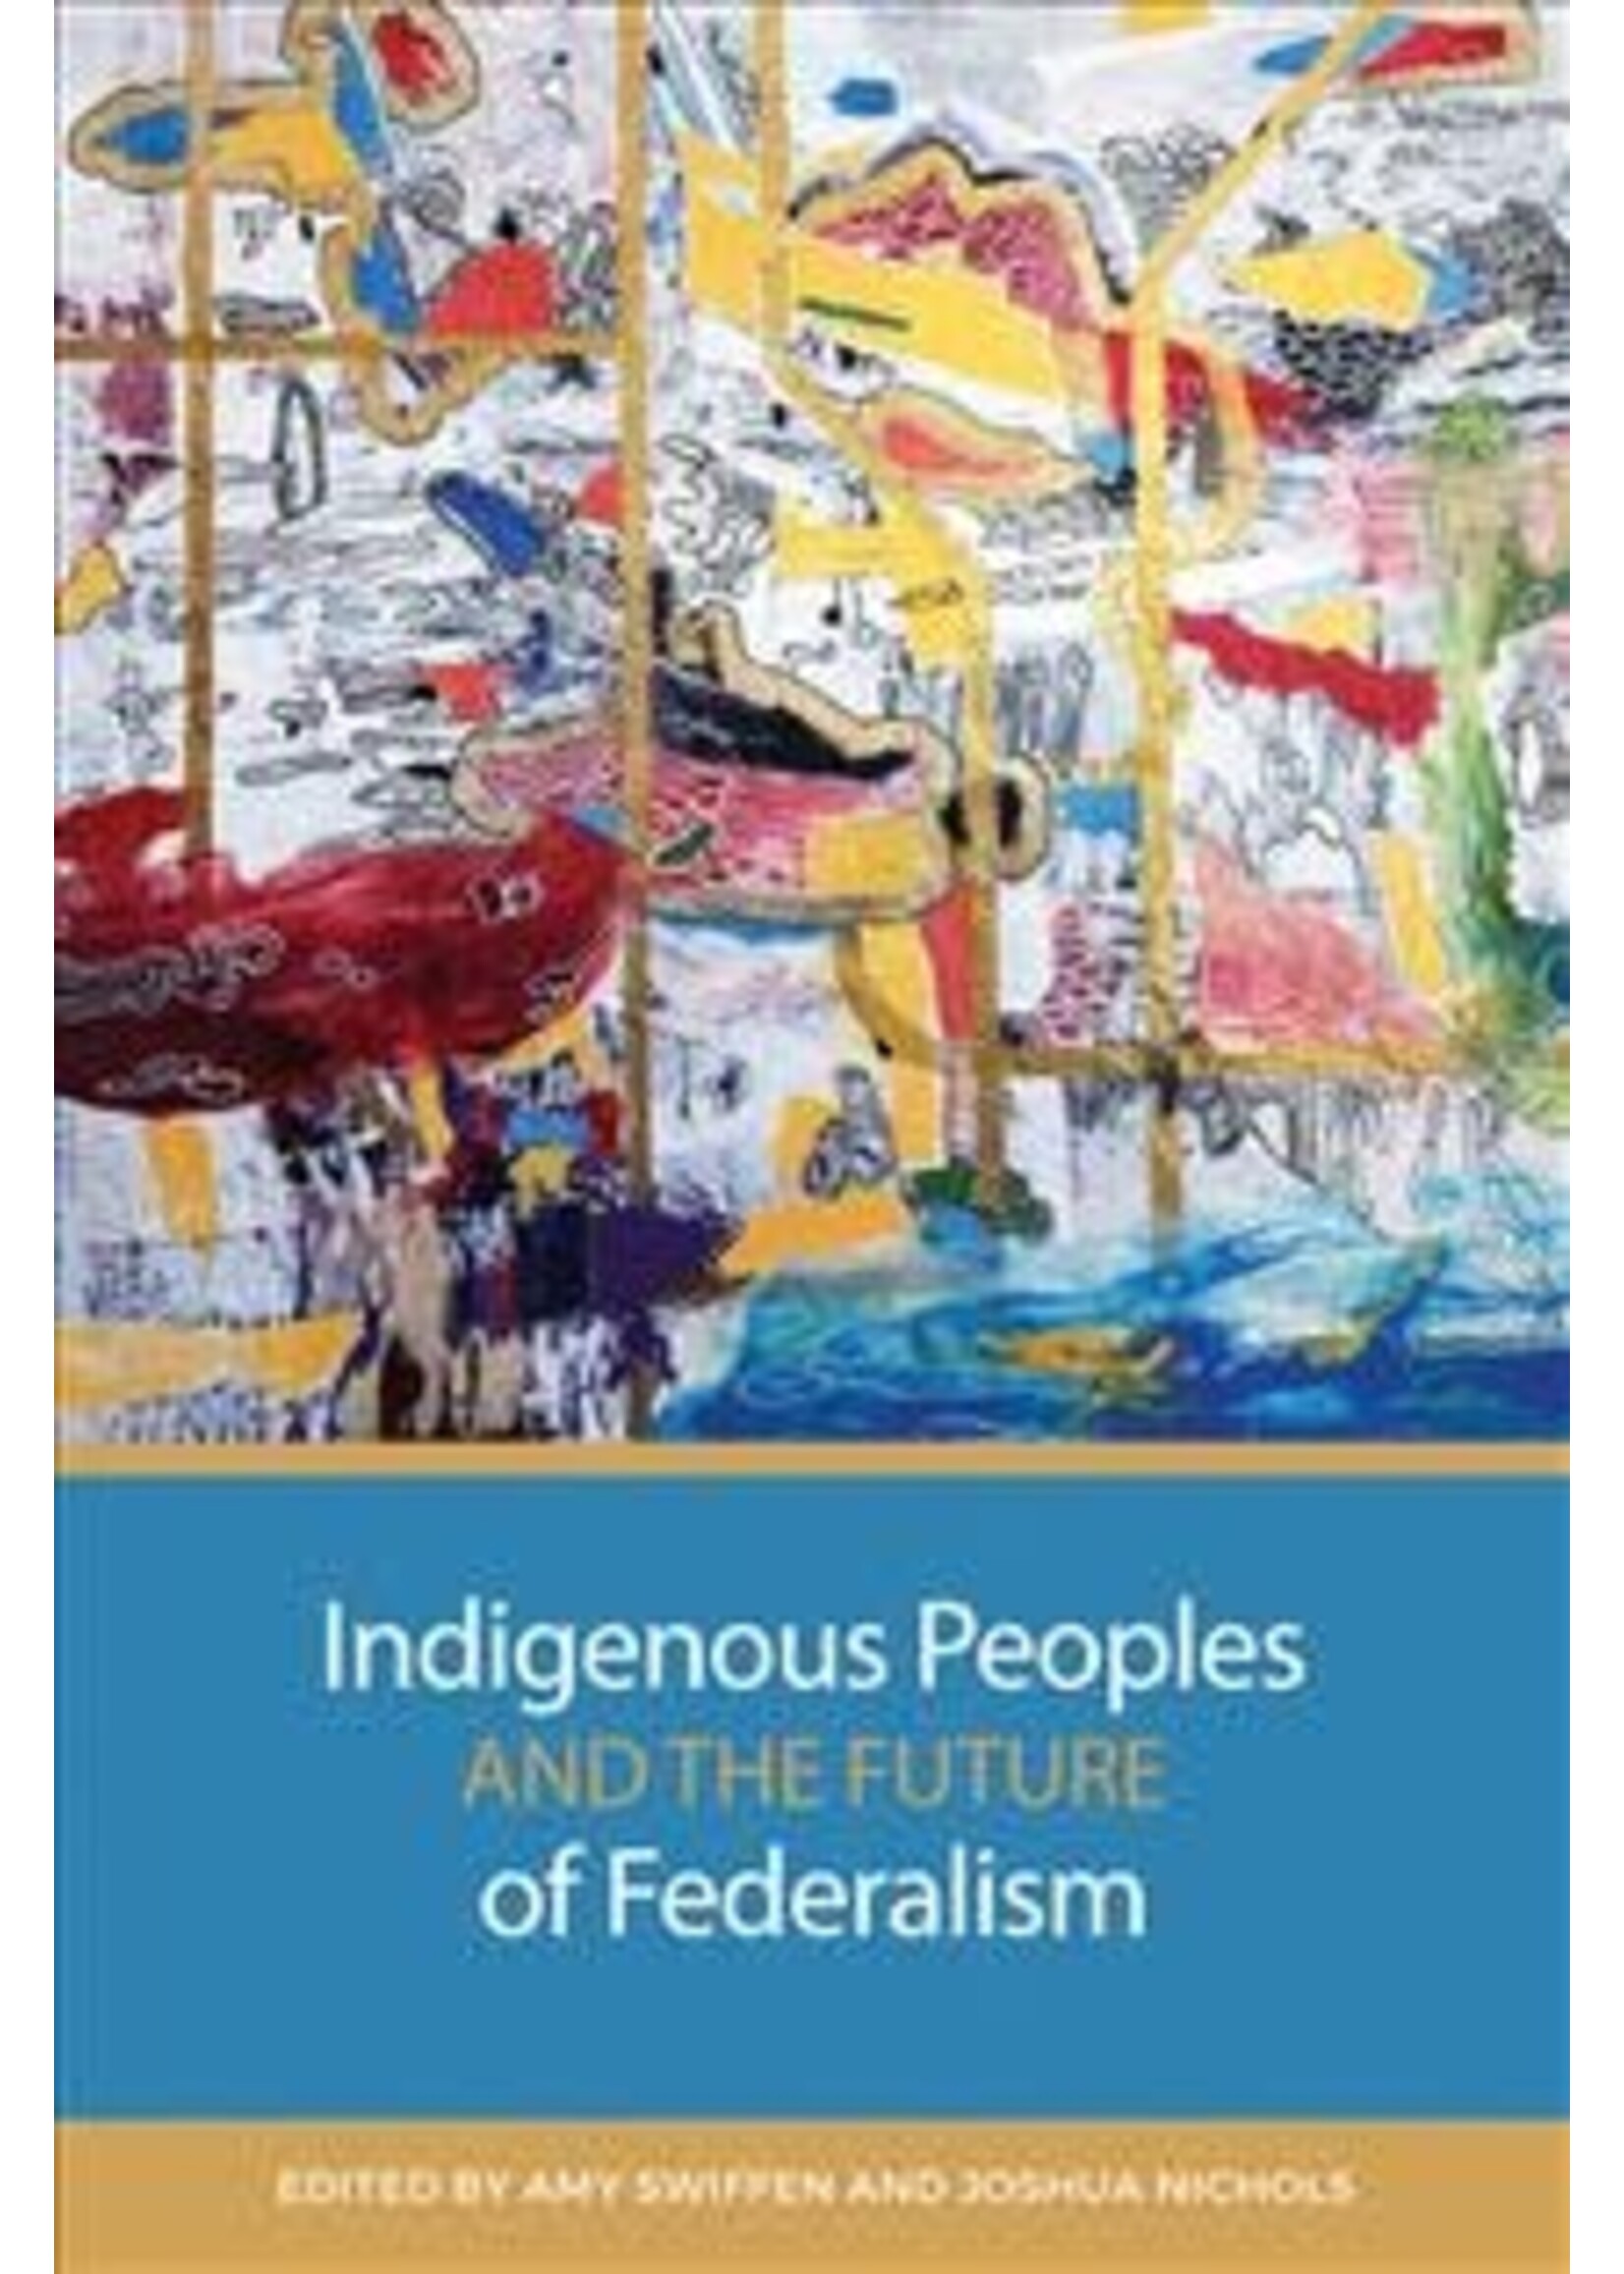 Indigenous Peoples and the Future of Federalism by Amy Swiffen, Joshua Nichols